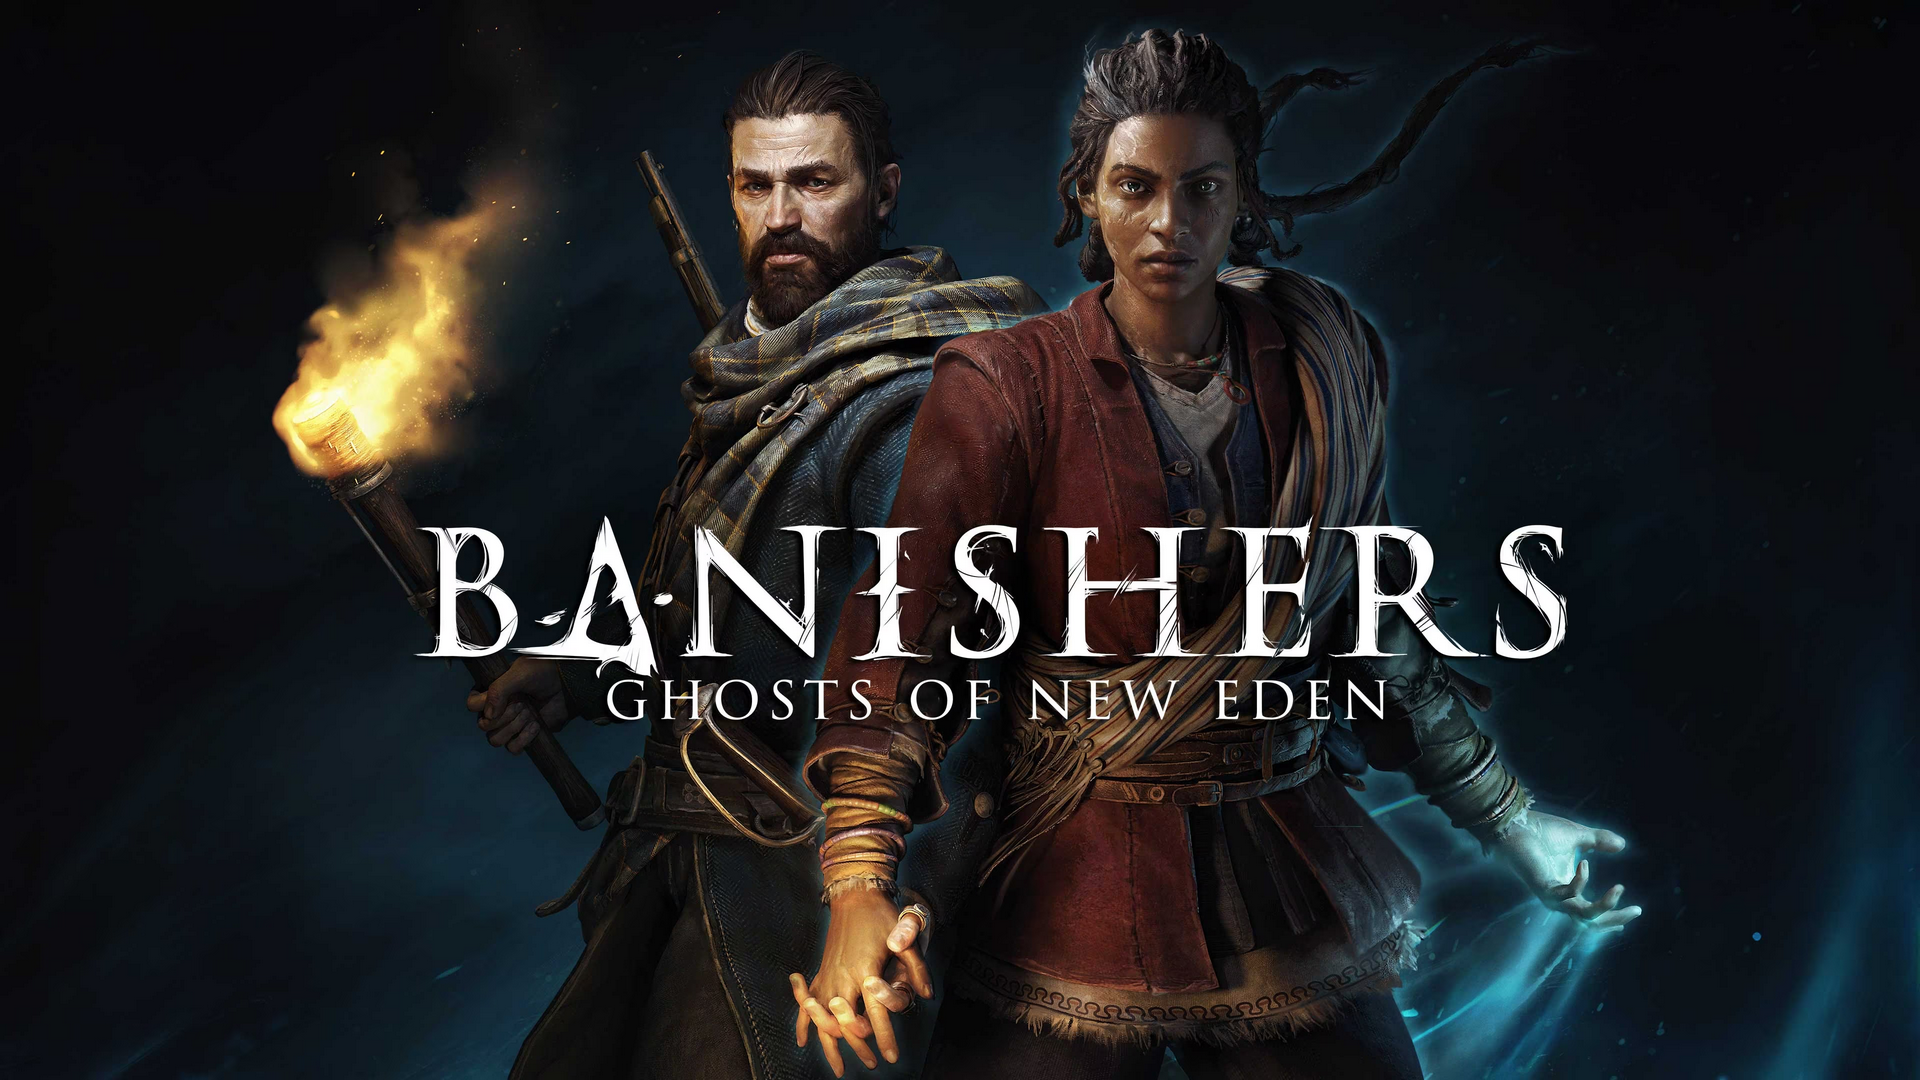 Banishers: Ghosts Of New Eden Free Playable Demo Available Now